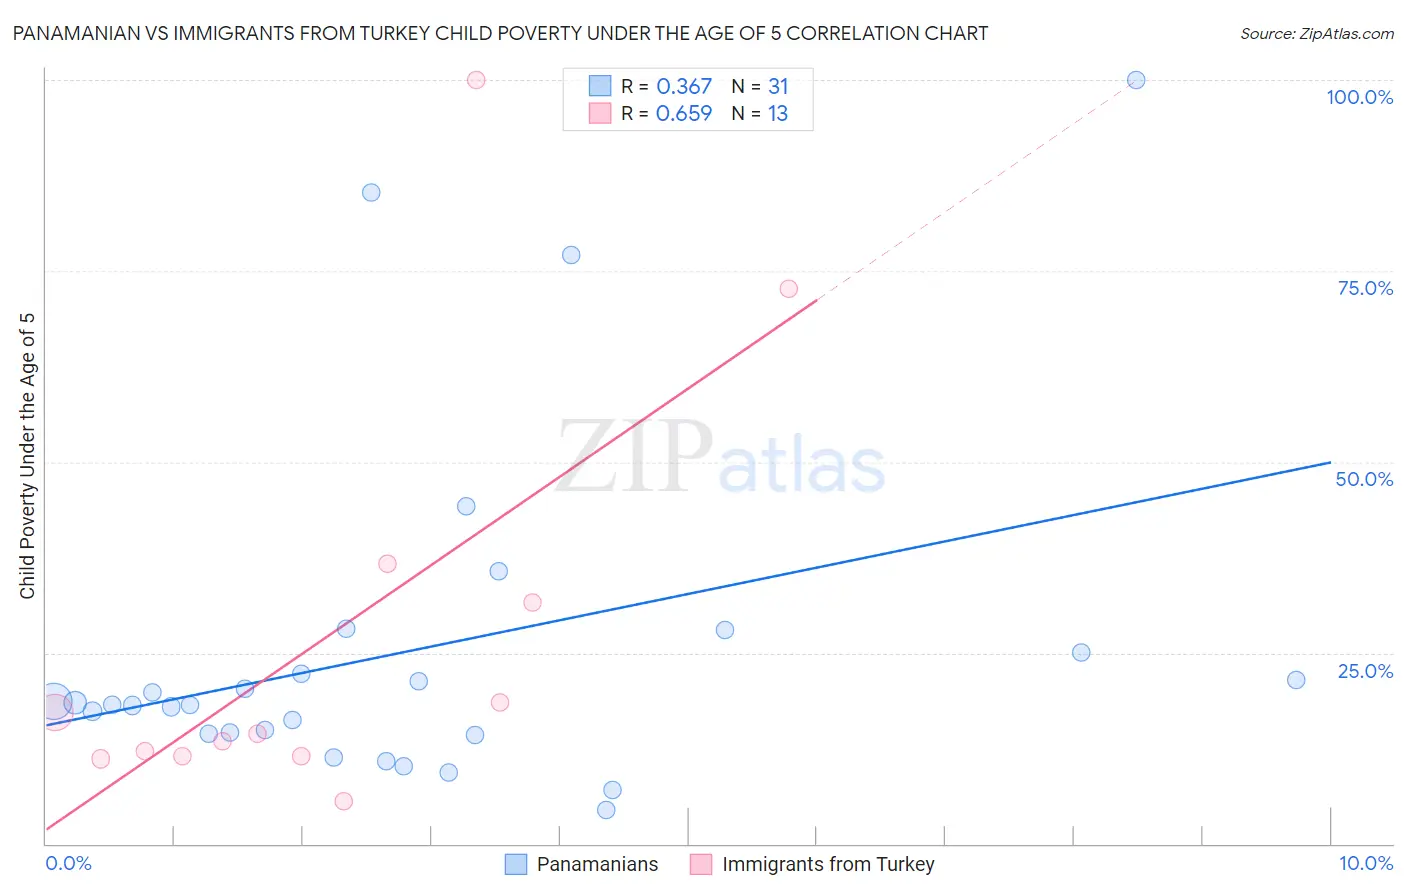 Panamanian vs Immigrants from Turkey Child Poverty Under the Age of 5